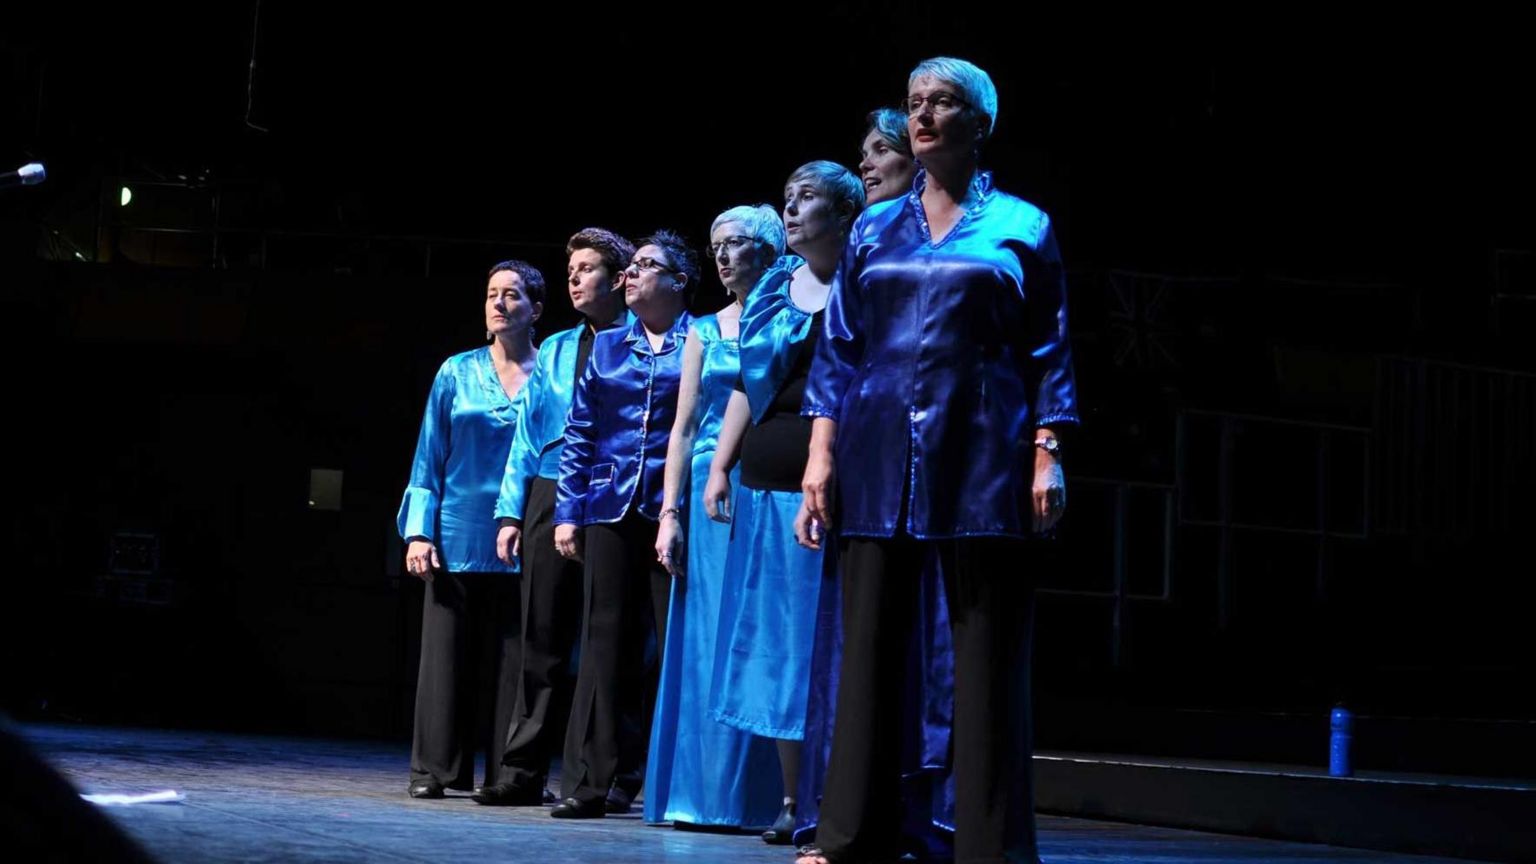 Seven people stand in a line on stage singing